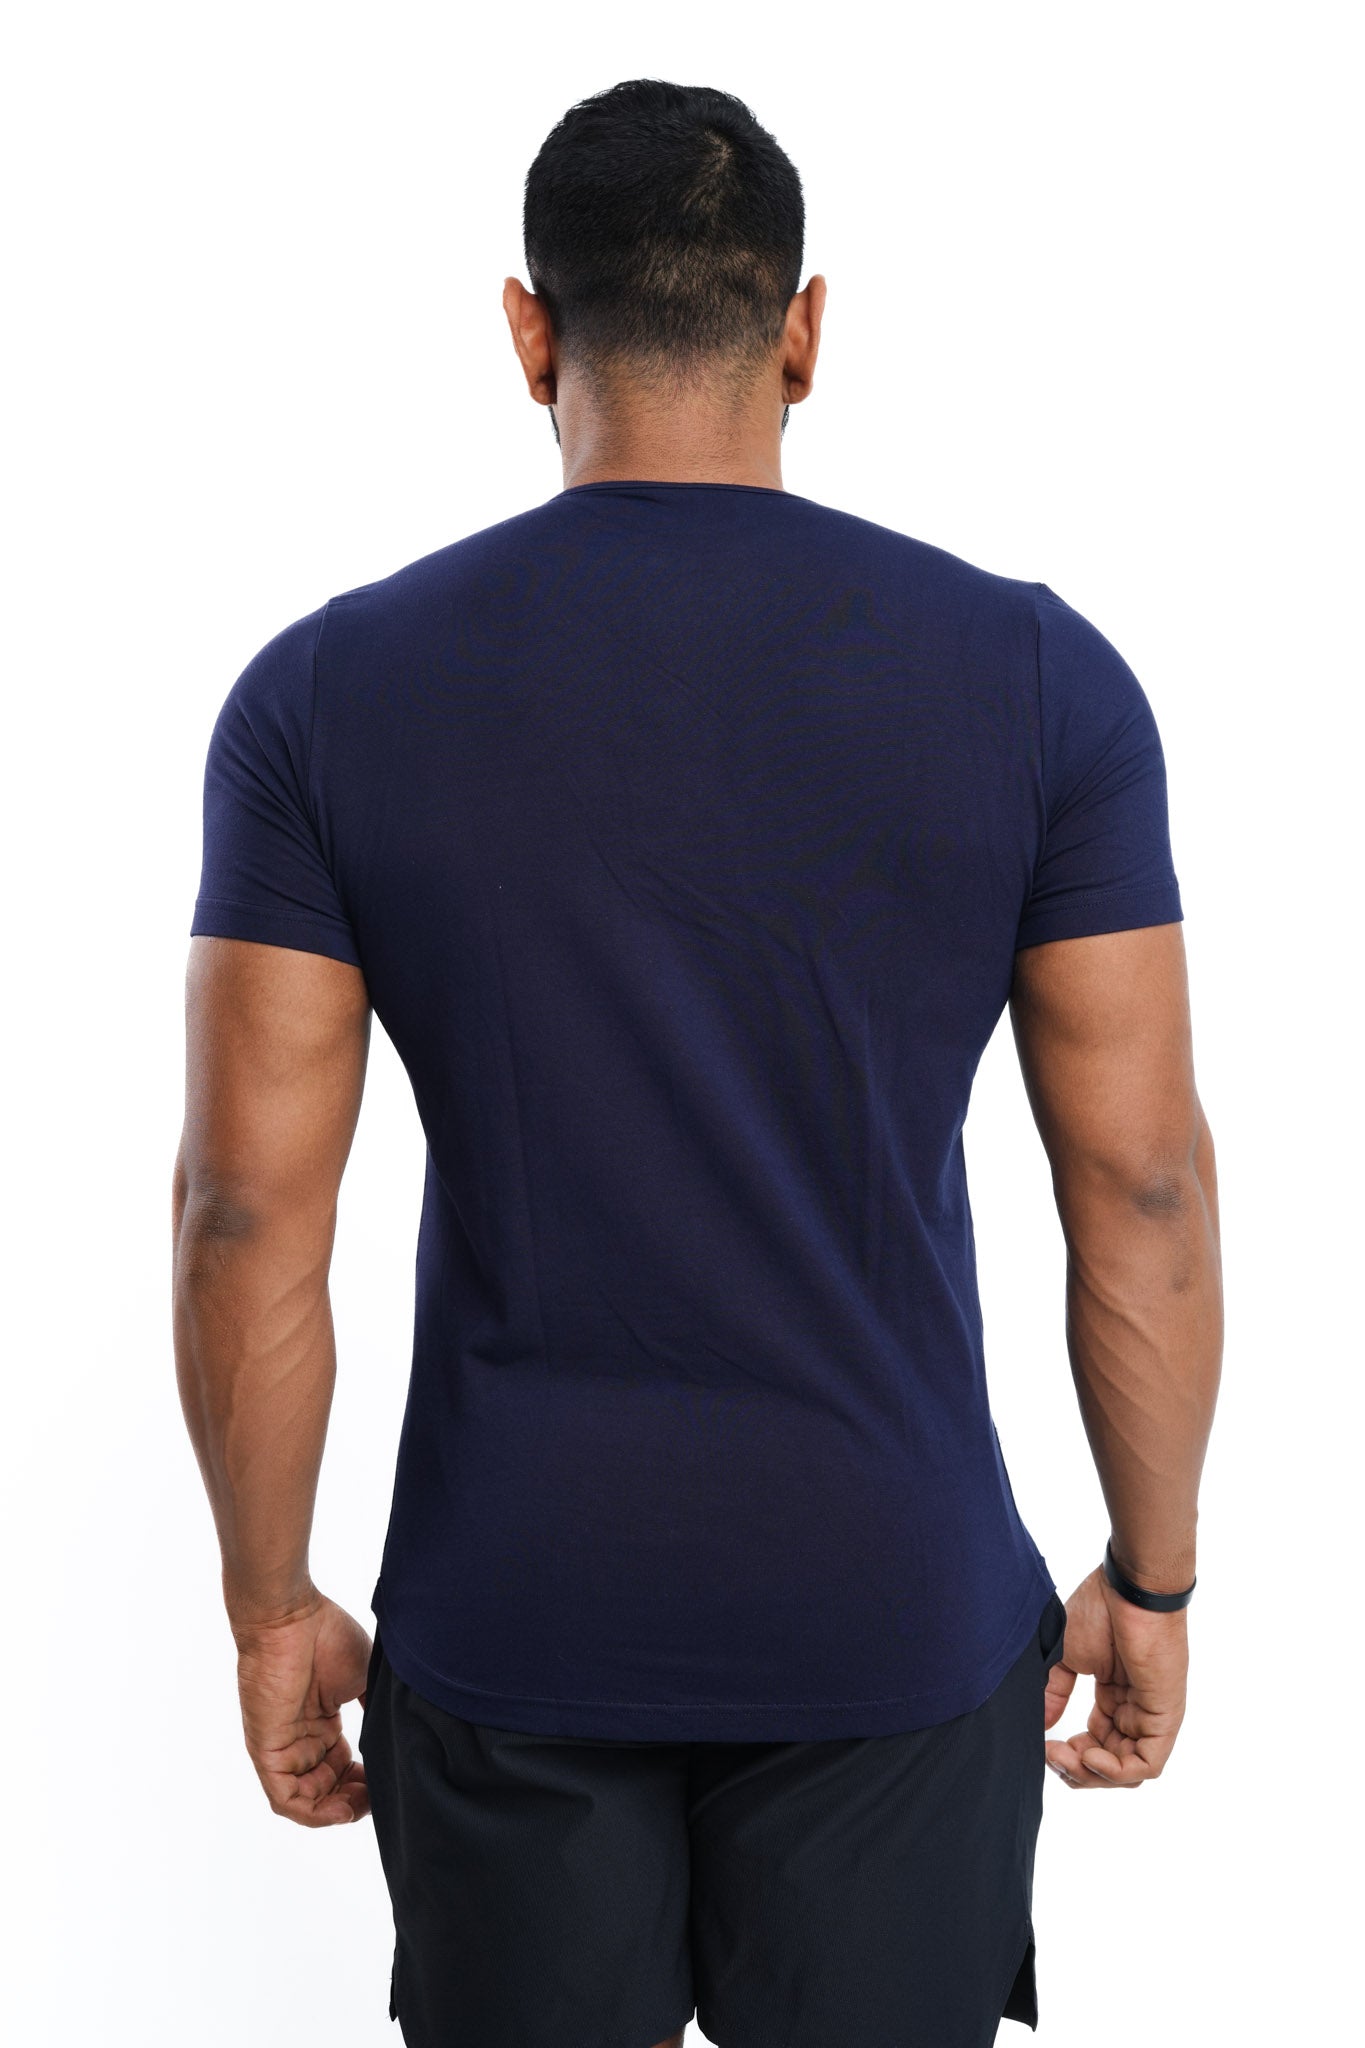 Essential Henly - Navy